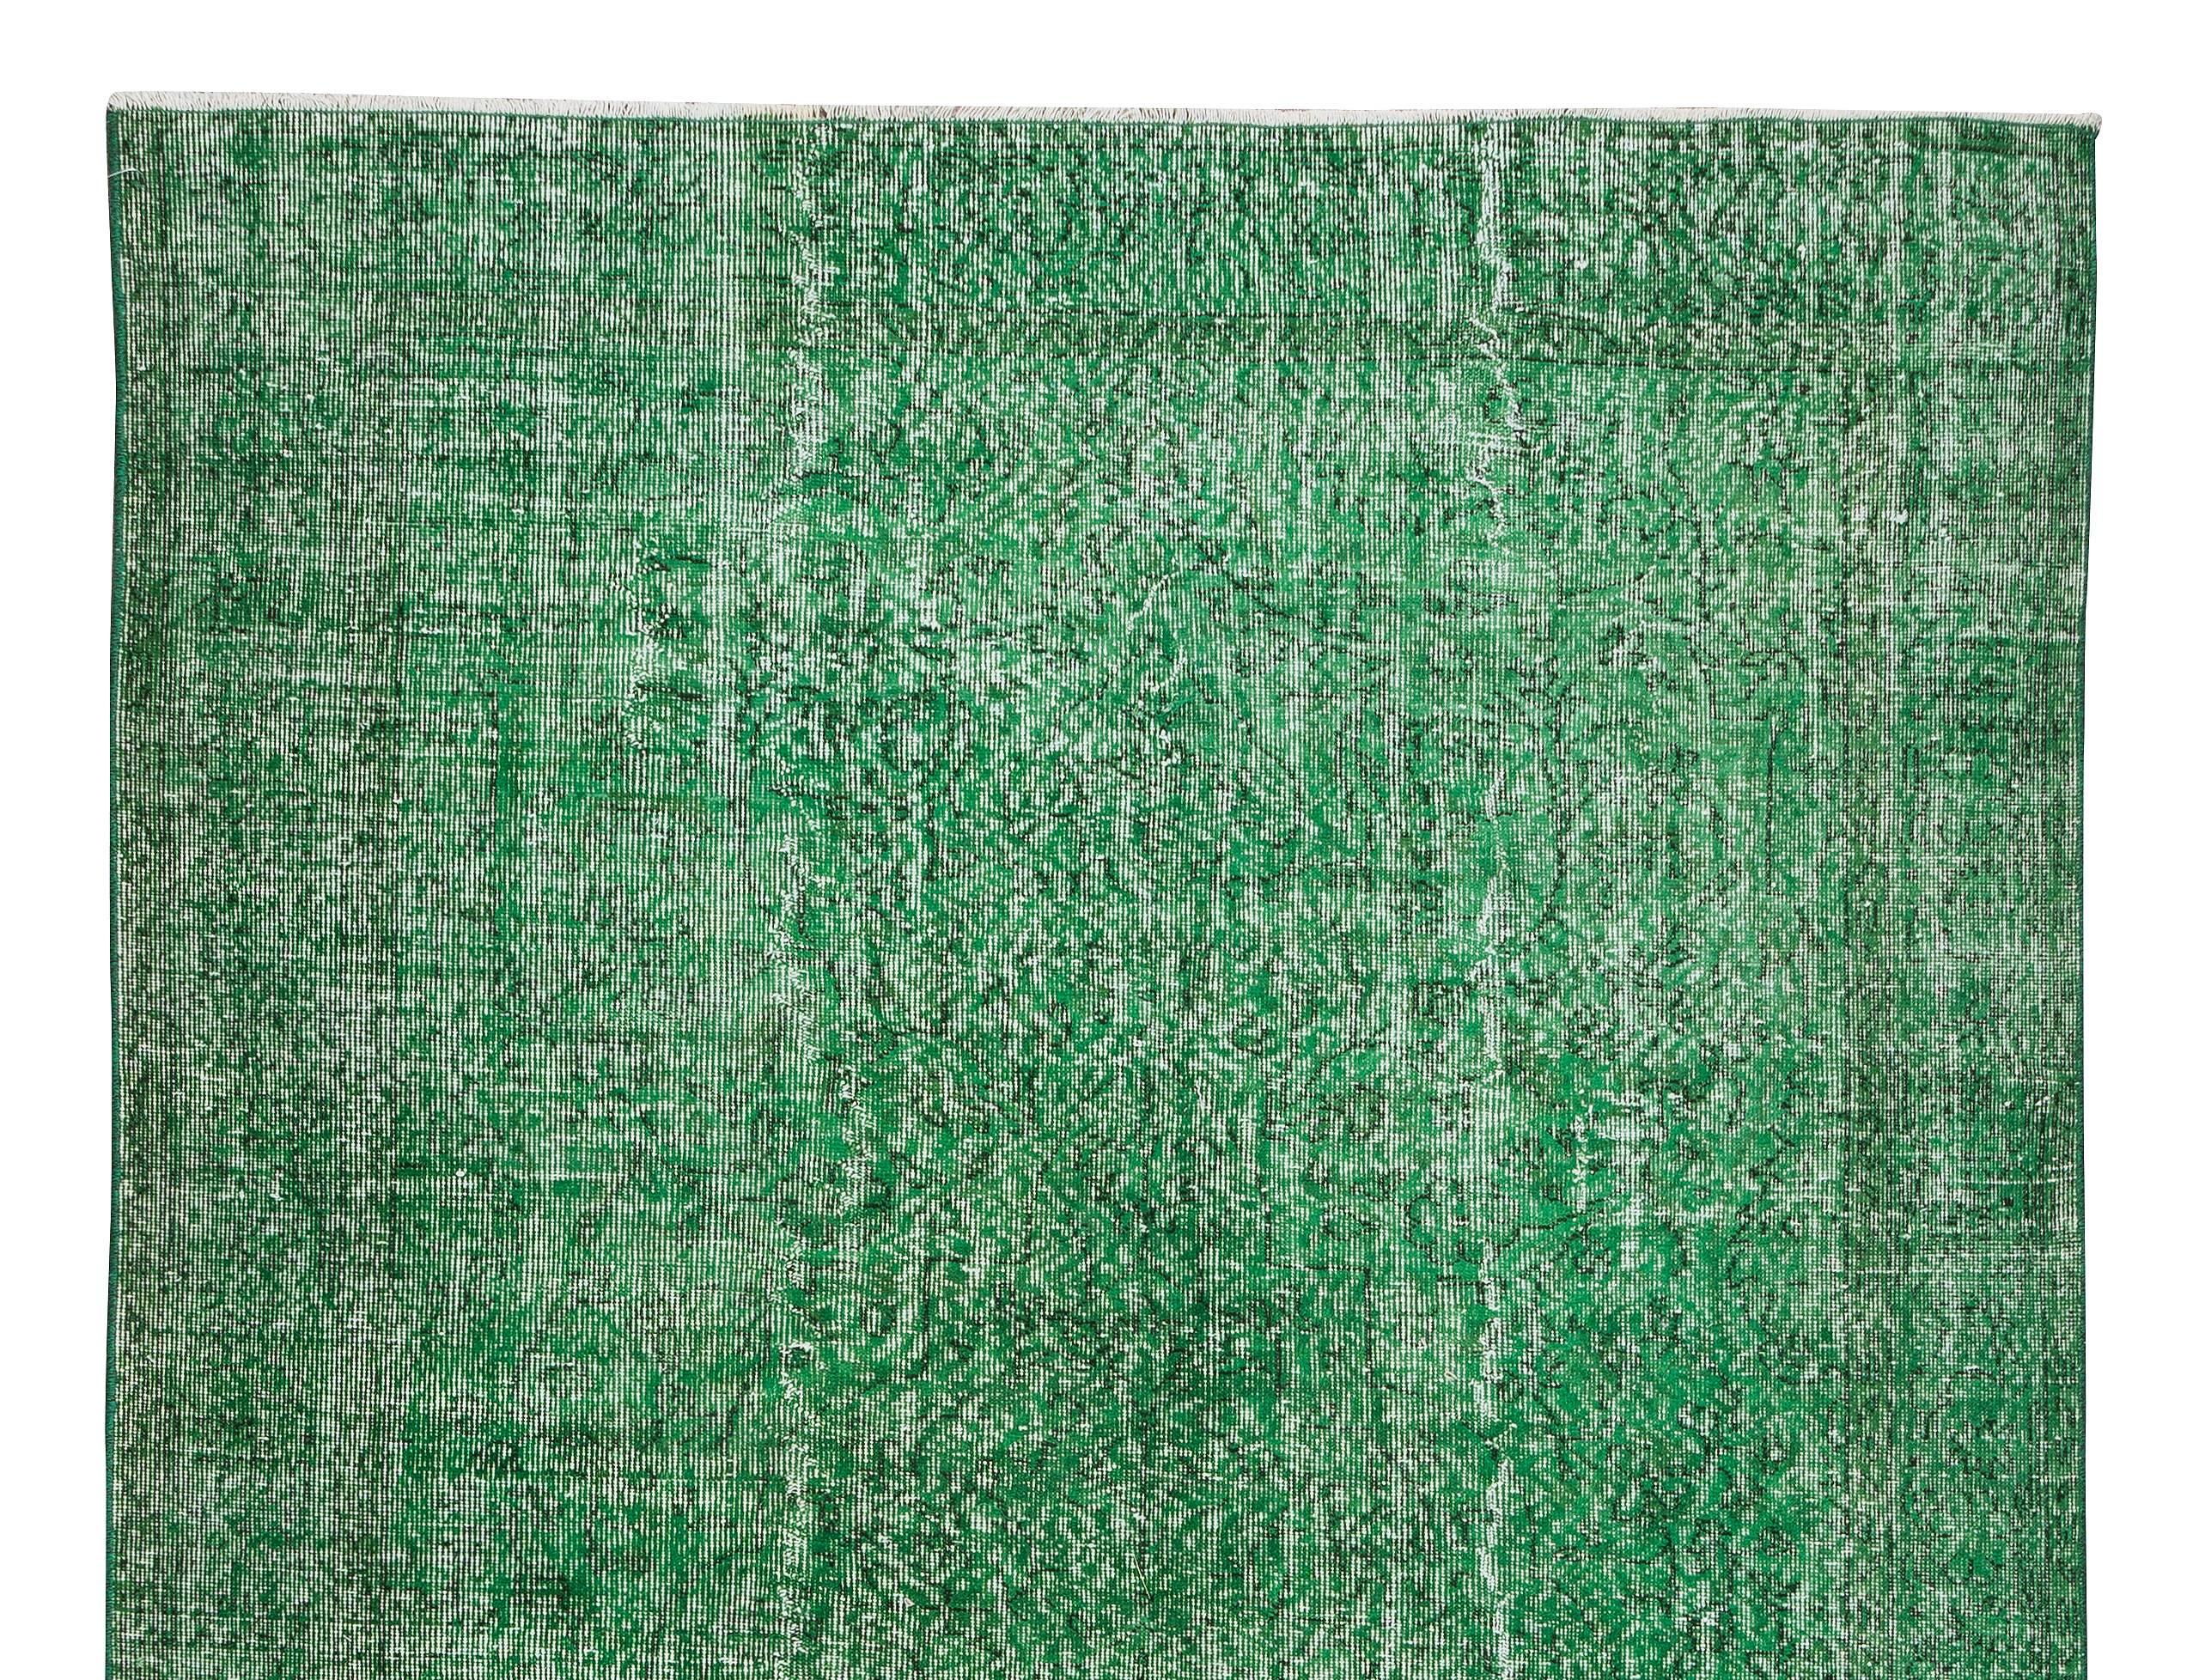 Hand-Knotted 6.5x10 Ft Vintage Decorative Rug, Hand Made Turkish Wool Carpet Re-Dyed in Green For Sale